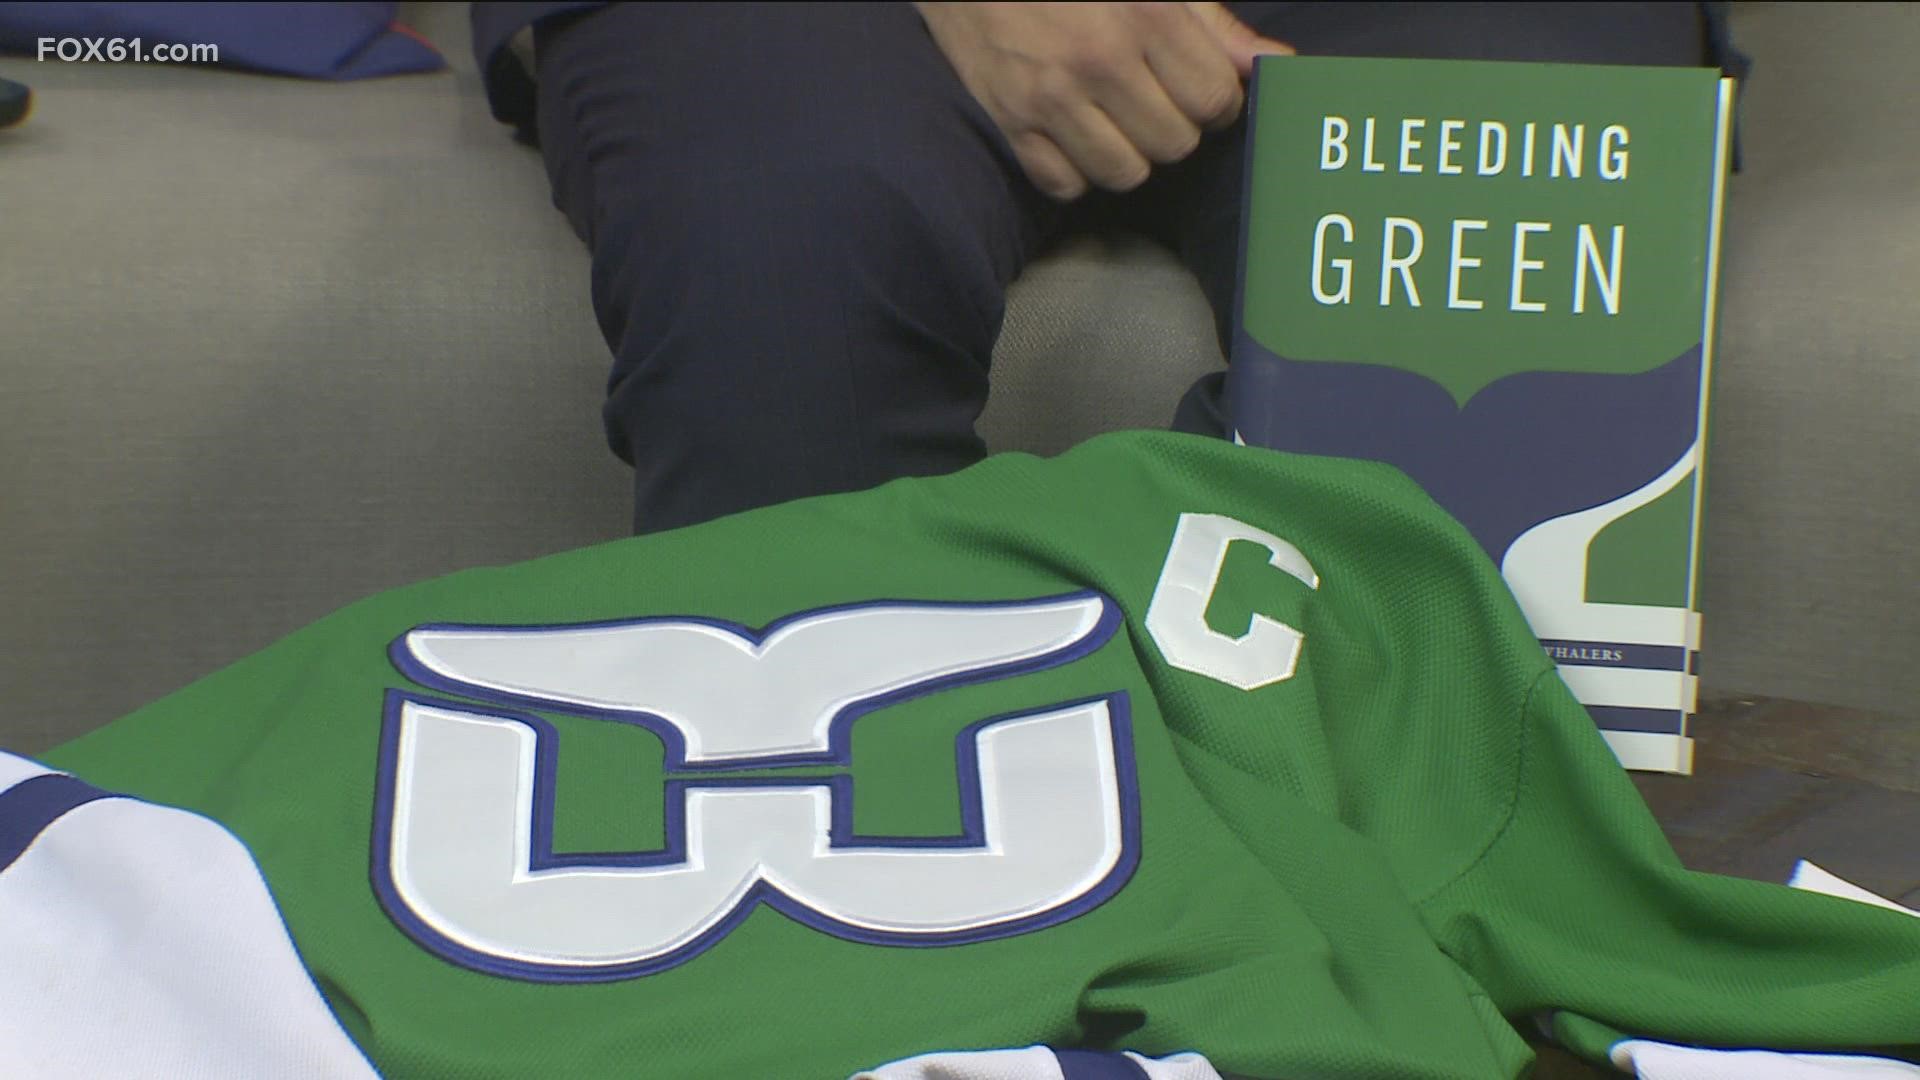 "Bleeding Green" tells the history of the Hartford Whalers and shares the passion fans had for the hockey team.